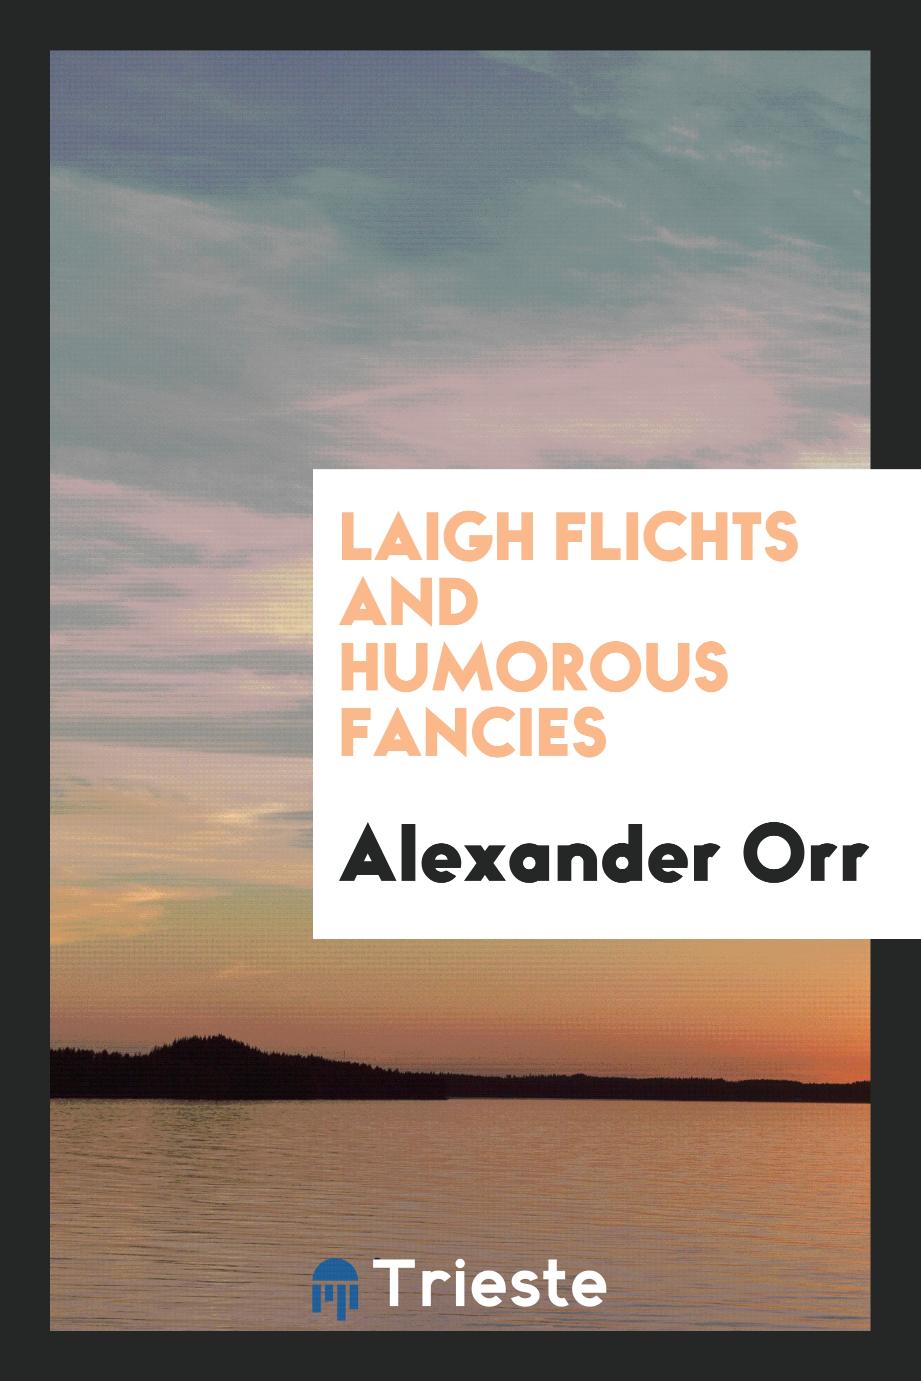 Laigh Flichts and Humorous Fancies